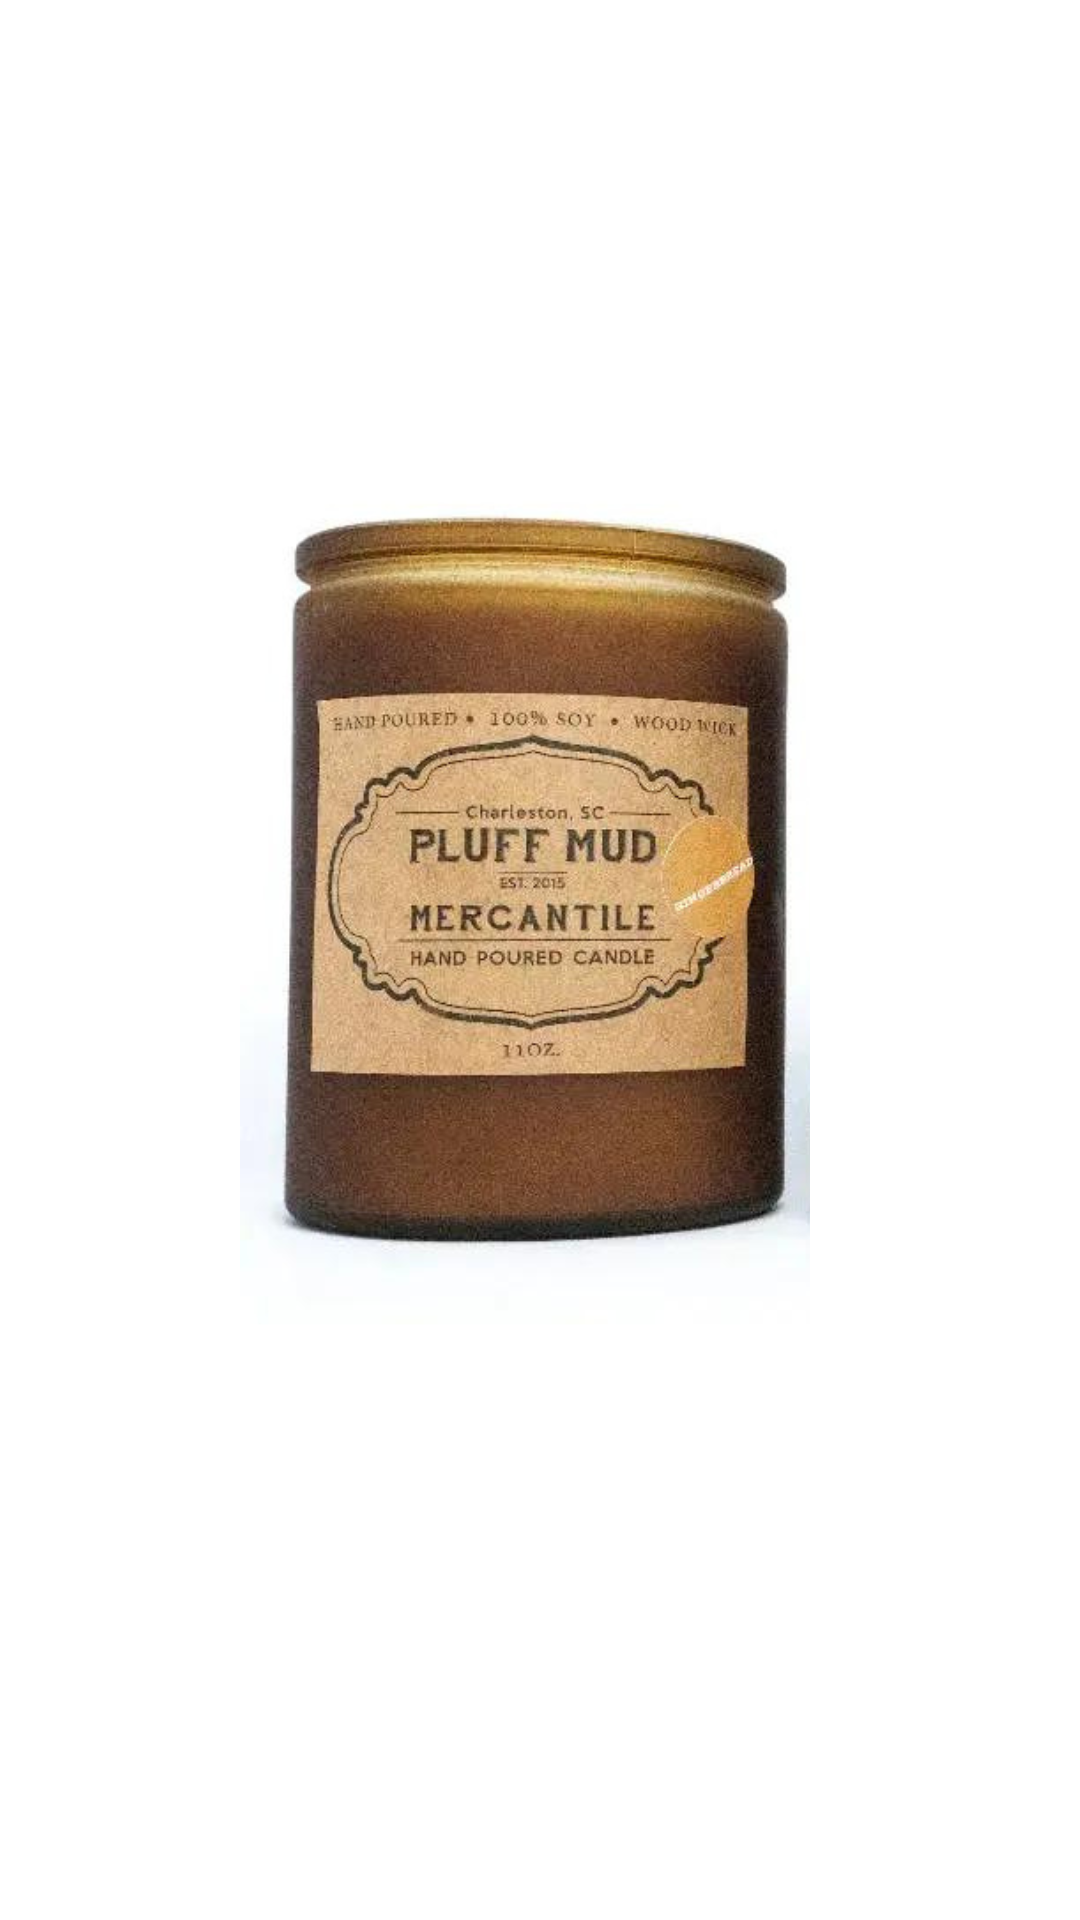 Christmas Memories Hand Poured Soy Candle - Pluff Mud Mercantile